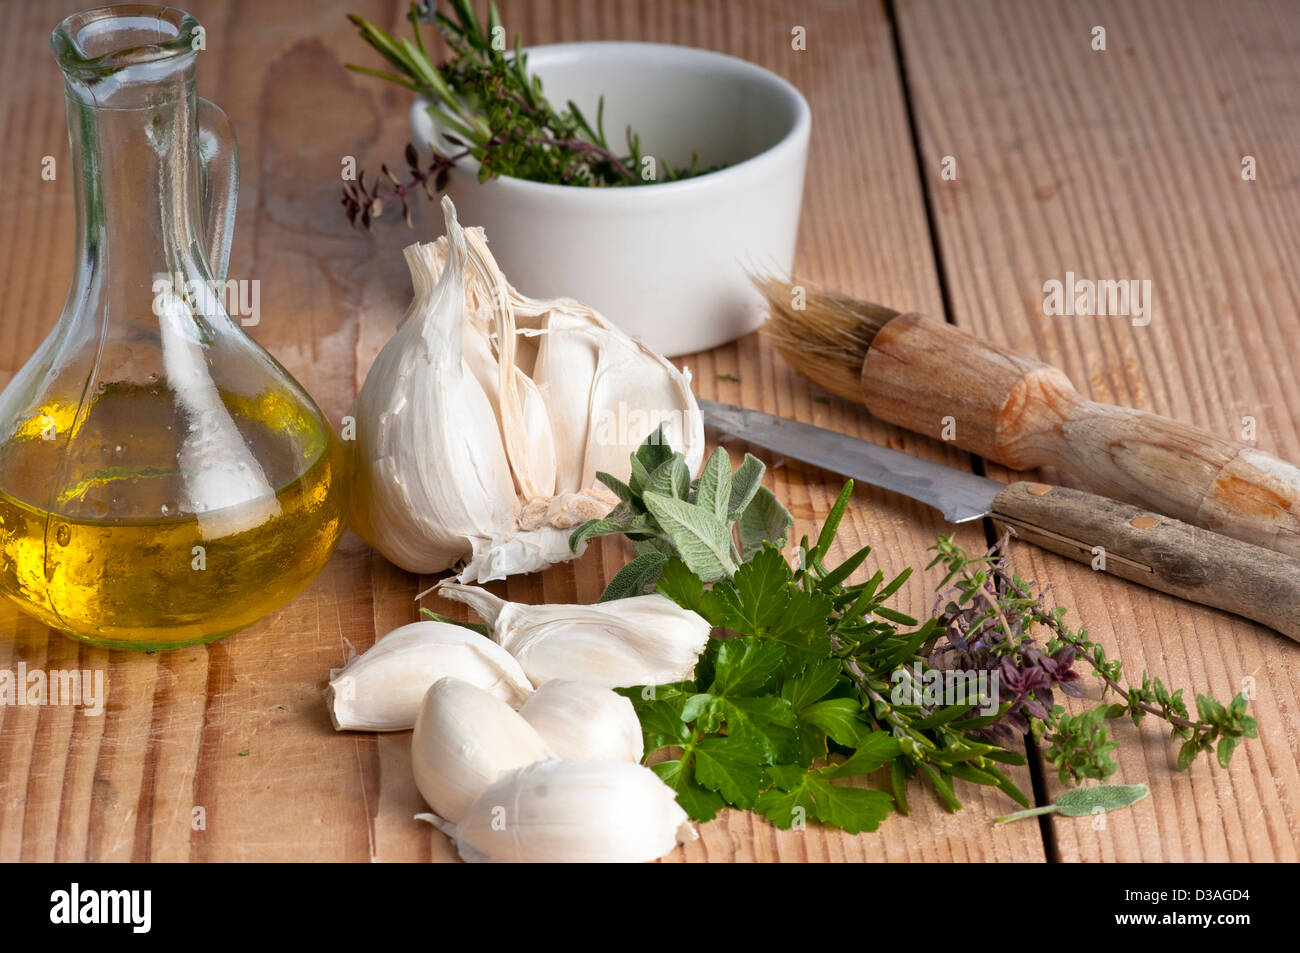 Garlic, parsley, sage, rosemary and thyme with extra virgin olive oil in a jug, a brush and knife. on an antique chopping board. Stock Photo